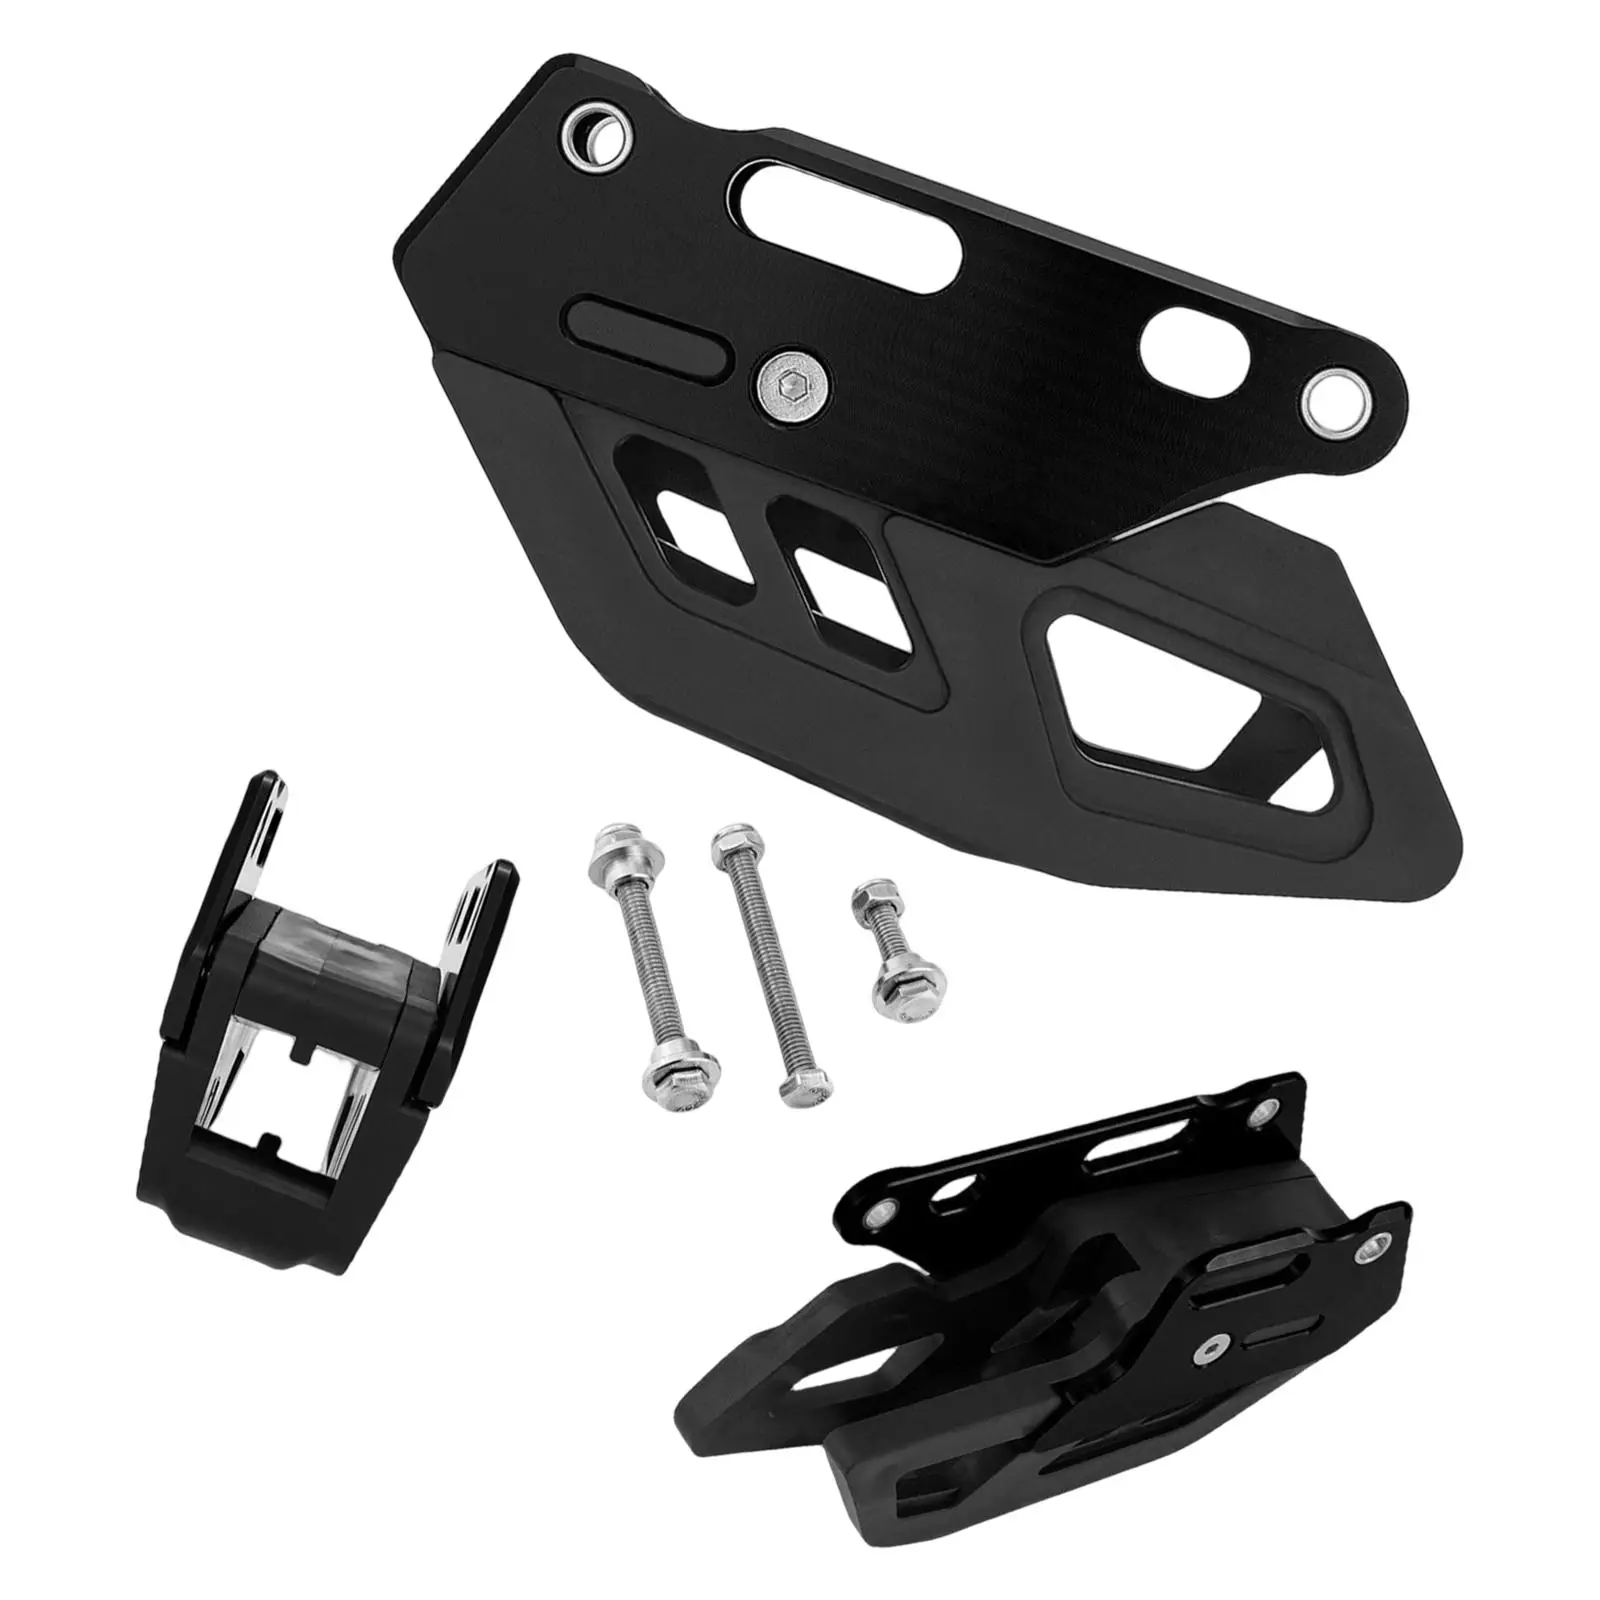 Motorcycle Chain Guard Guide Replaces Protection Bracket Spare Parts Aluminium Alloy Rubber Accessories Universal